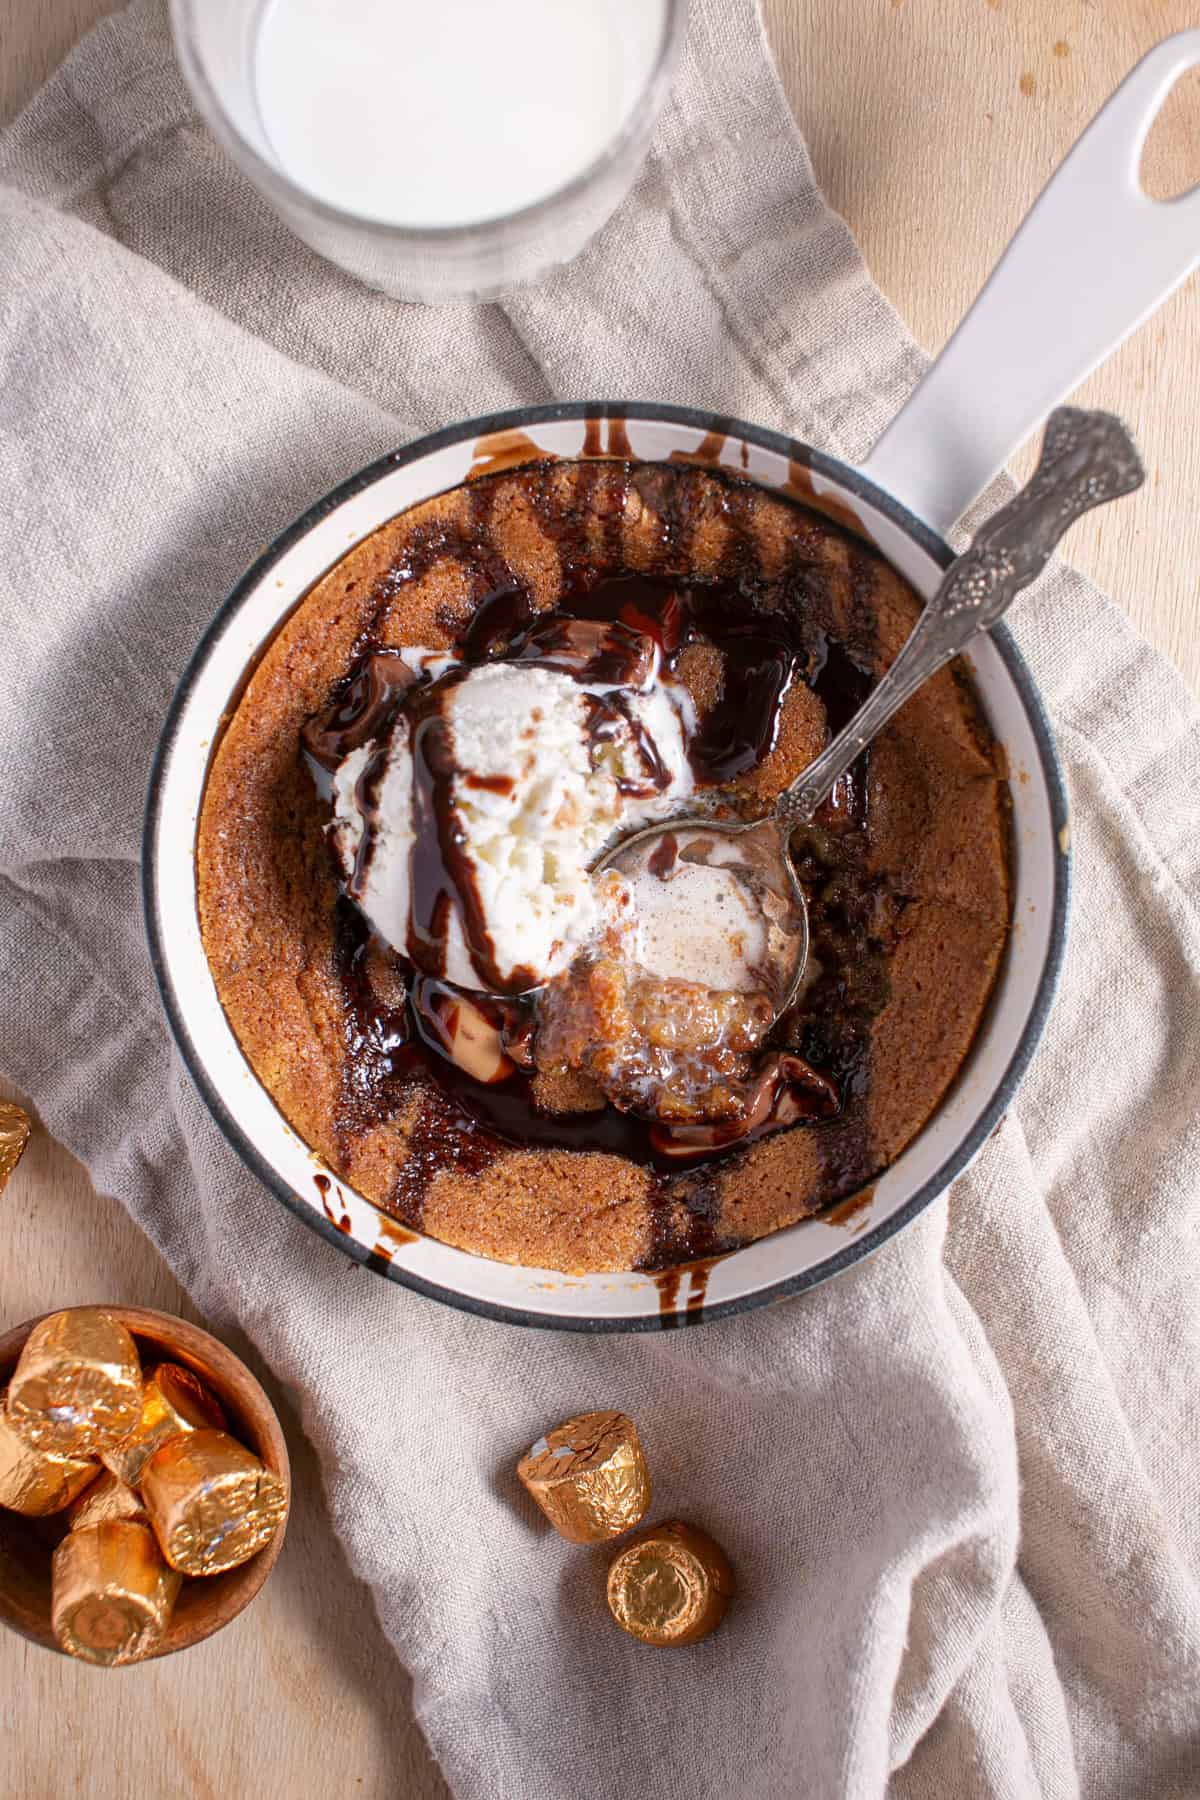 Skillet Chocolate Caramel Cookie sitting by a glass of milk.